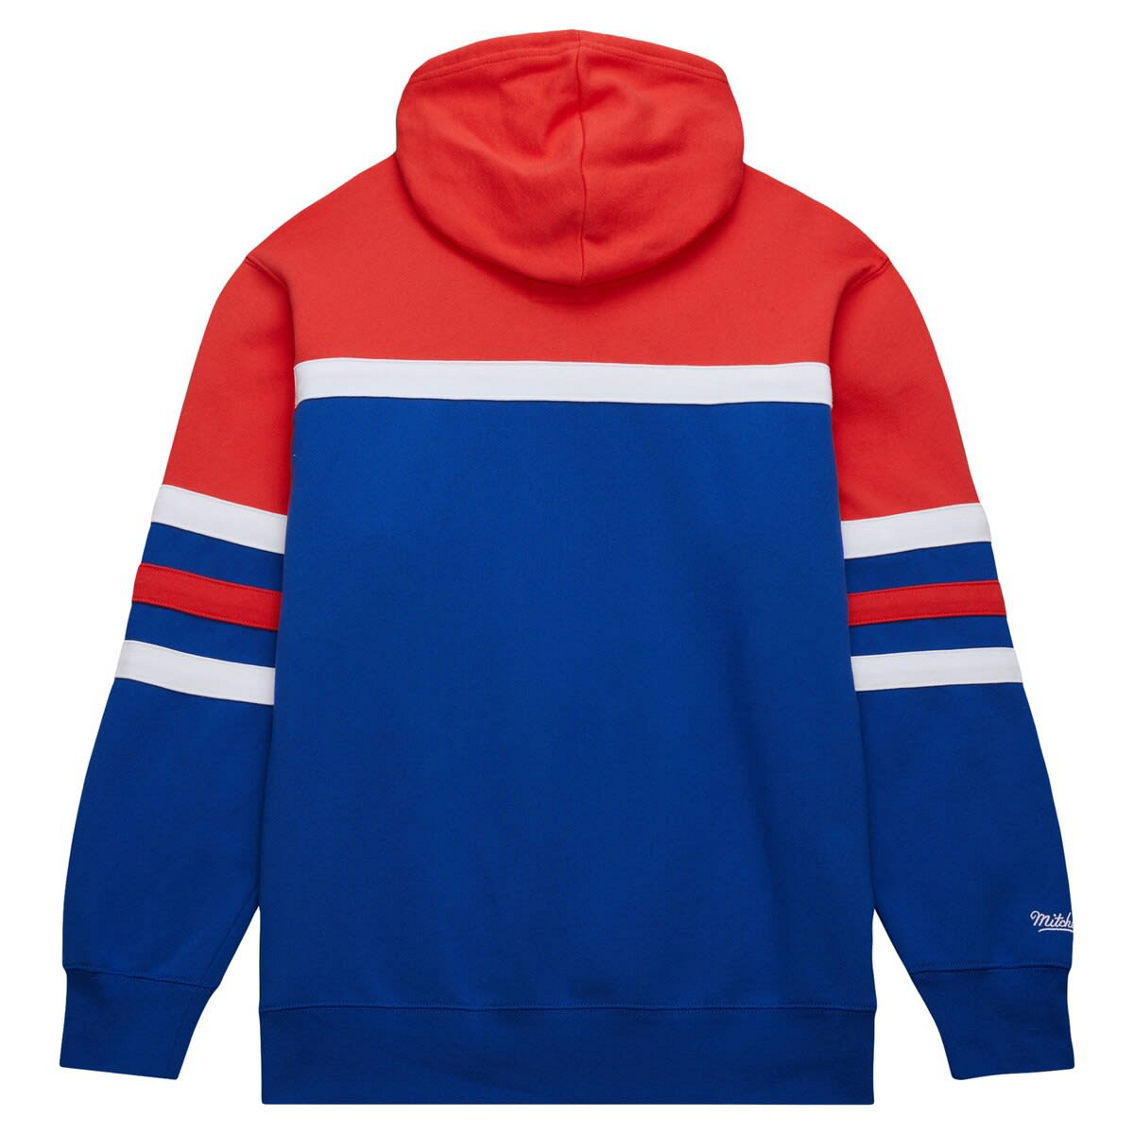 Mitchell & Ness Men's Royal/Red Denver Nuggets Head Coach Pullover Hoodie - Image 4 of 4